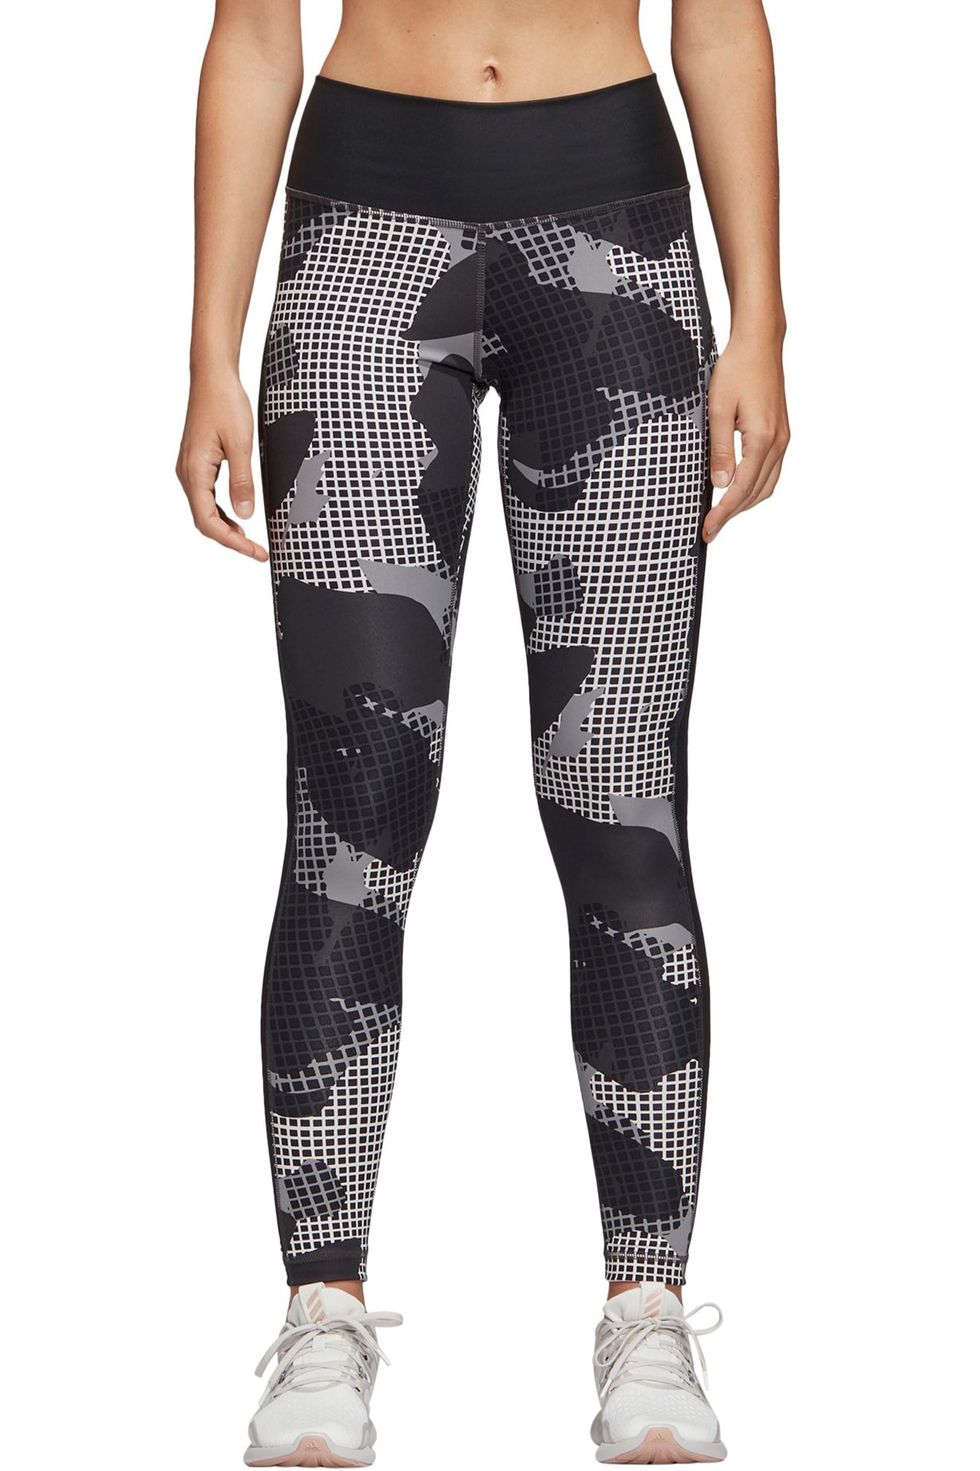 Victoria's Secret Total Knockout high-Rise Perforated Legging Size